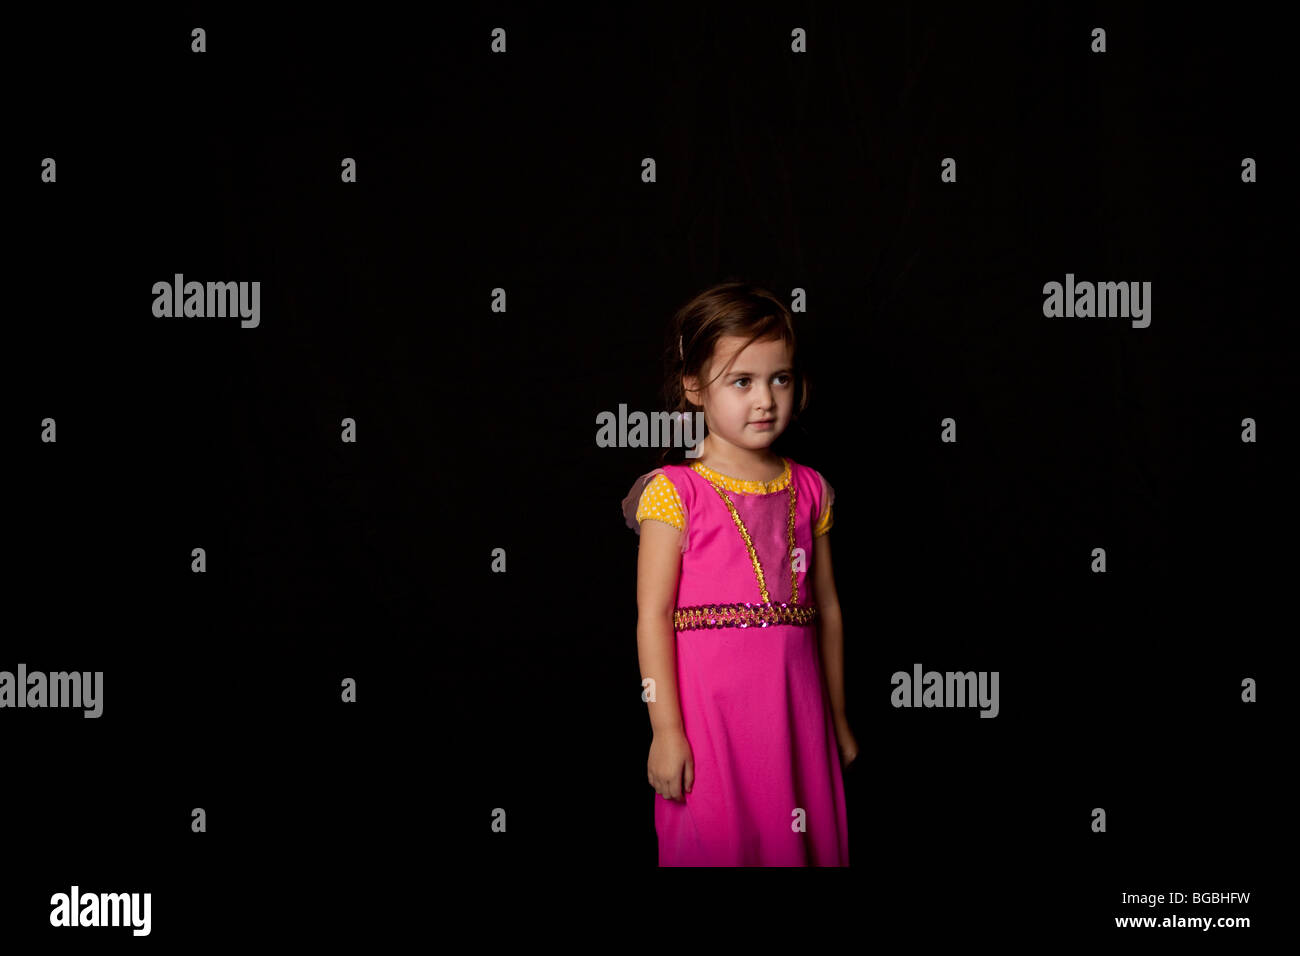 young girl standing alone against black background, wearing a pink dress. Stock Photo